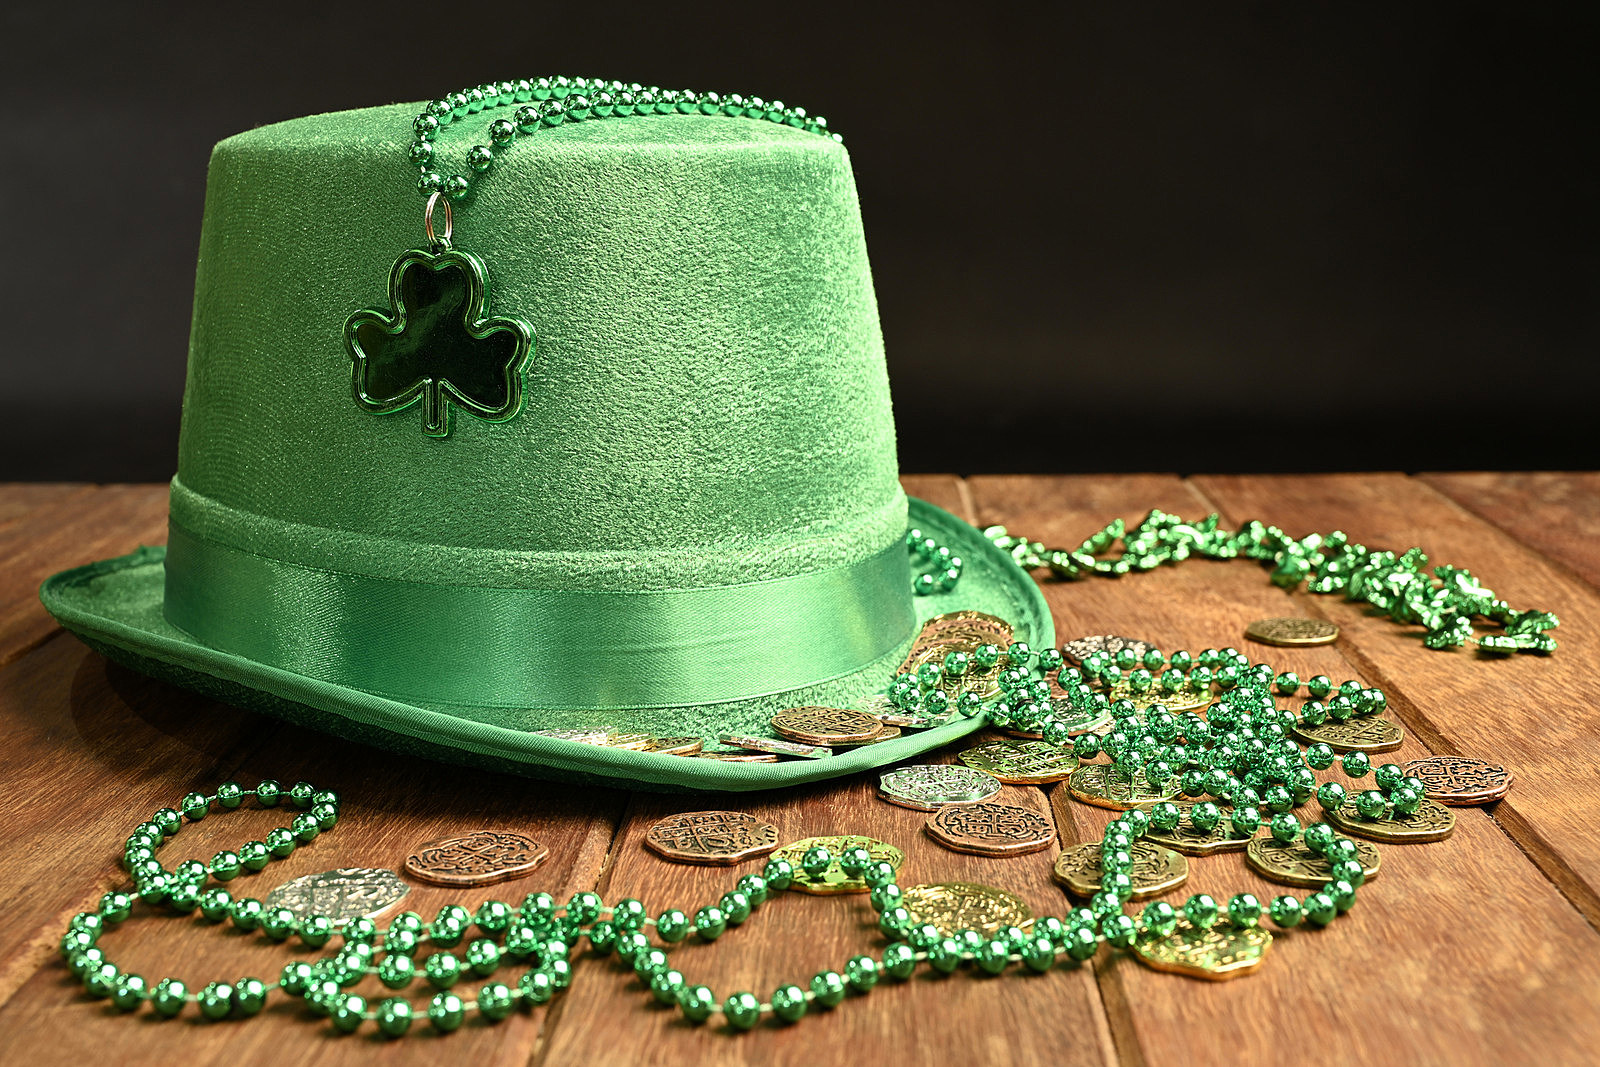 Get Ready For The Annual St. Patrick's Parade In Binghamton NY